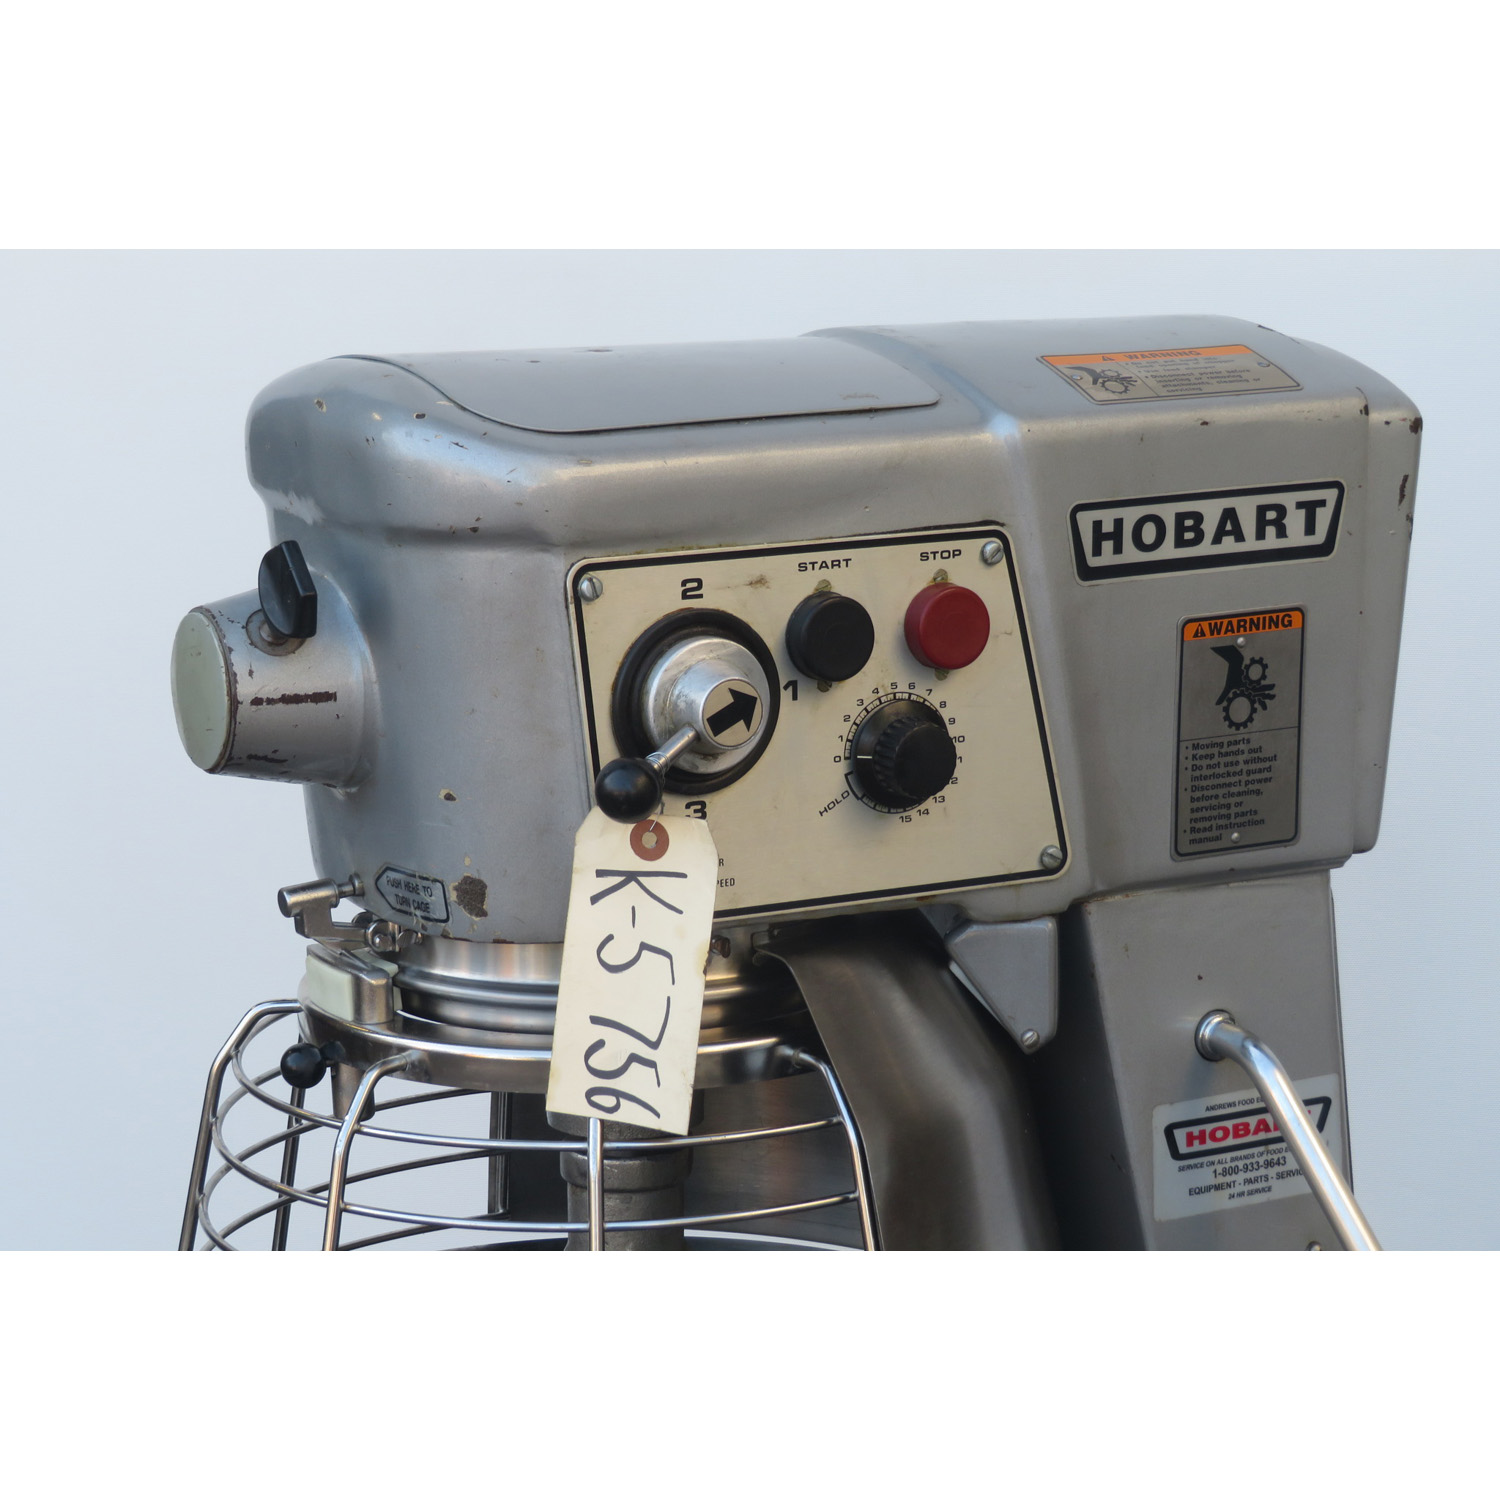 Hobart 30 Quart D300T Mixer with Guard, Used Excellent Condition image 1